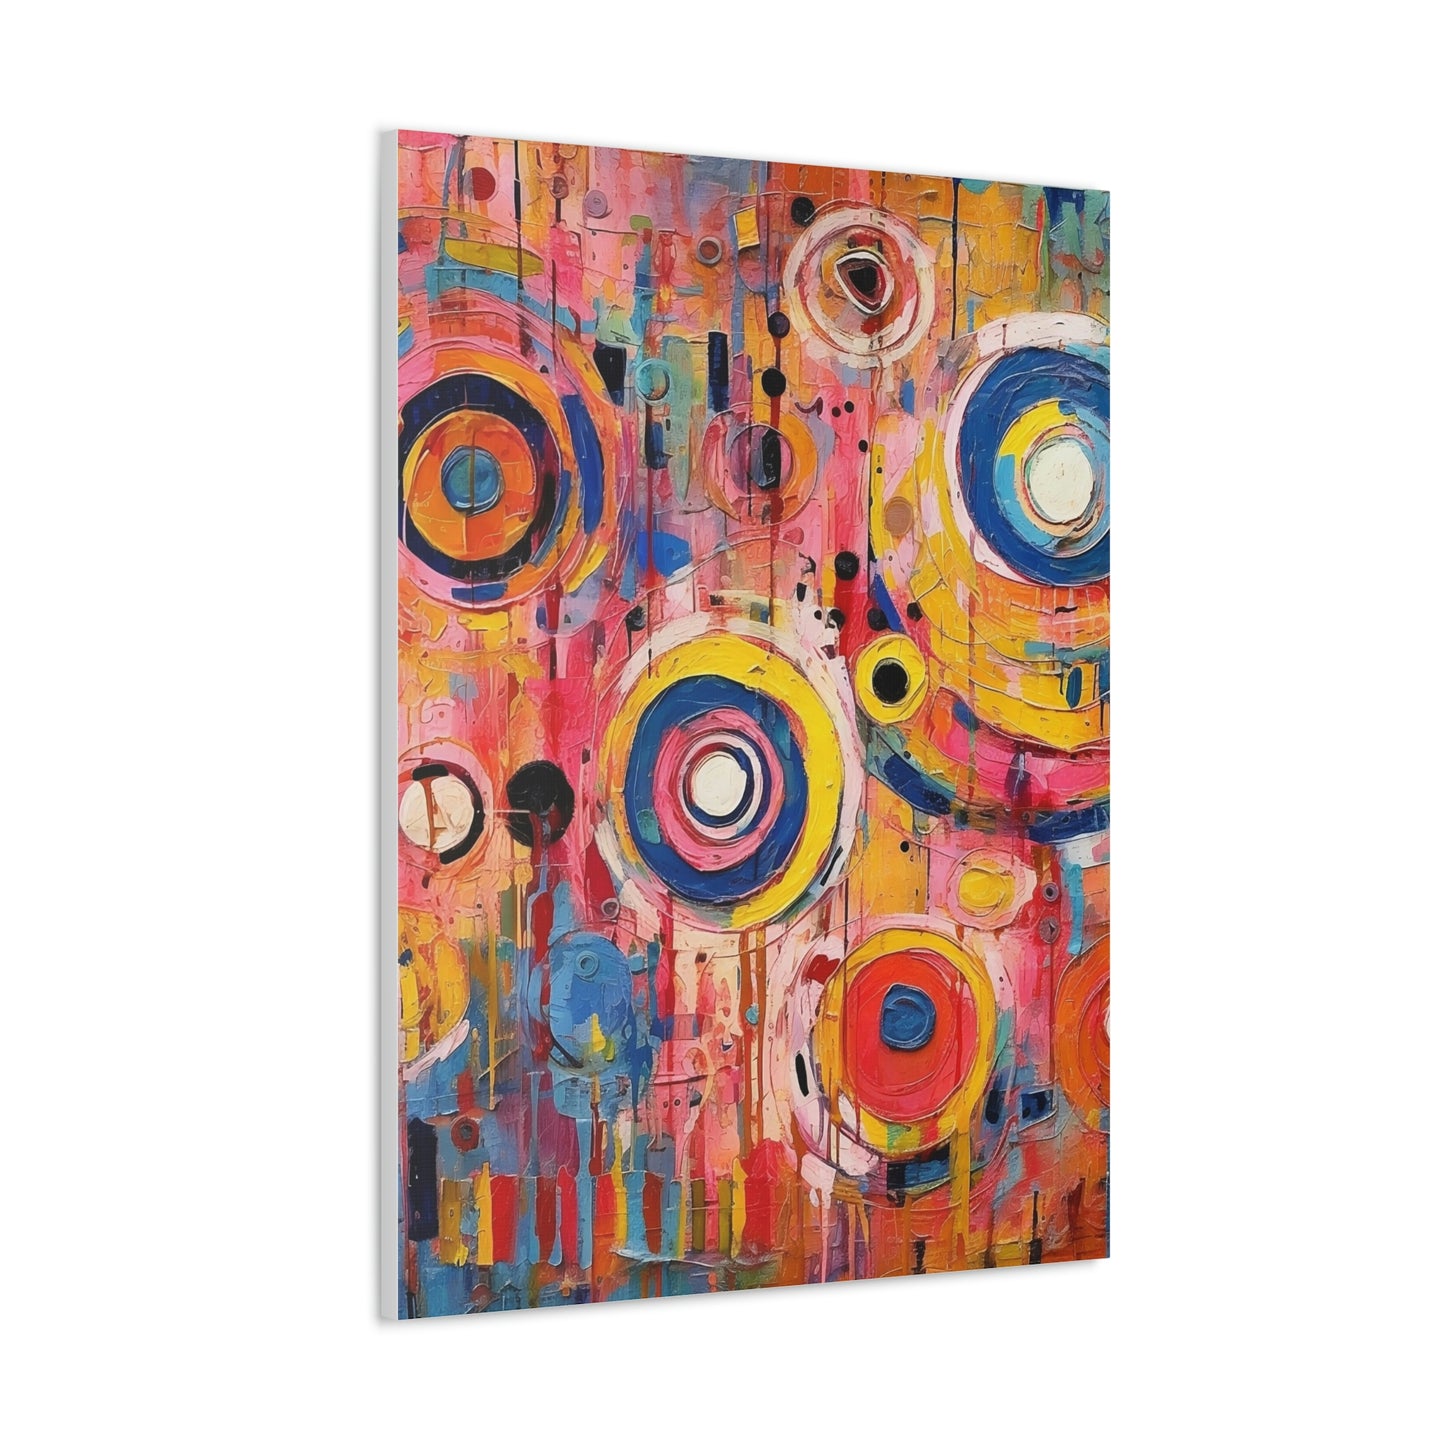 Abstract Collaborative Art, Unique Styles Fusion, Bold Color Display, Dynamic Shapes Mix Canvas Oil Painting